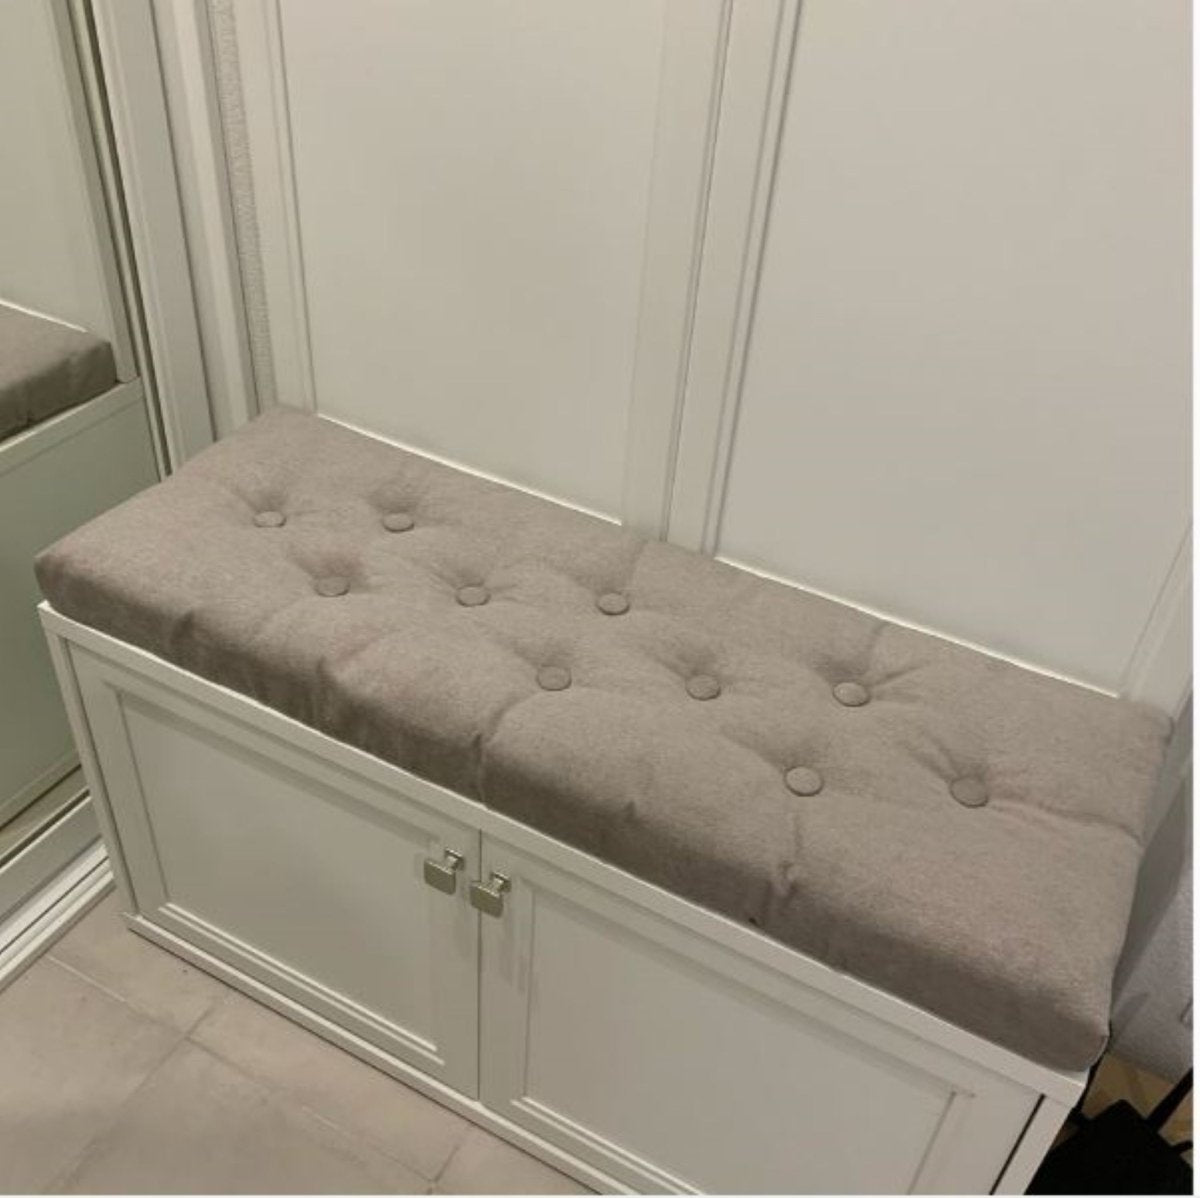 Cushion for shoes entryway bench with organize storage, custom small cabinet, changing seat